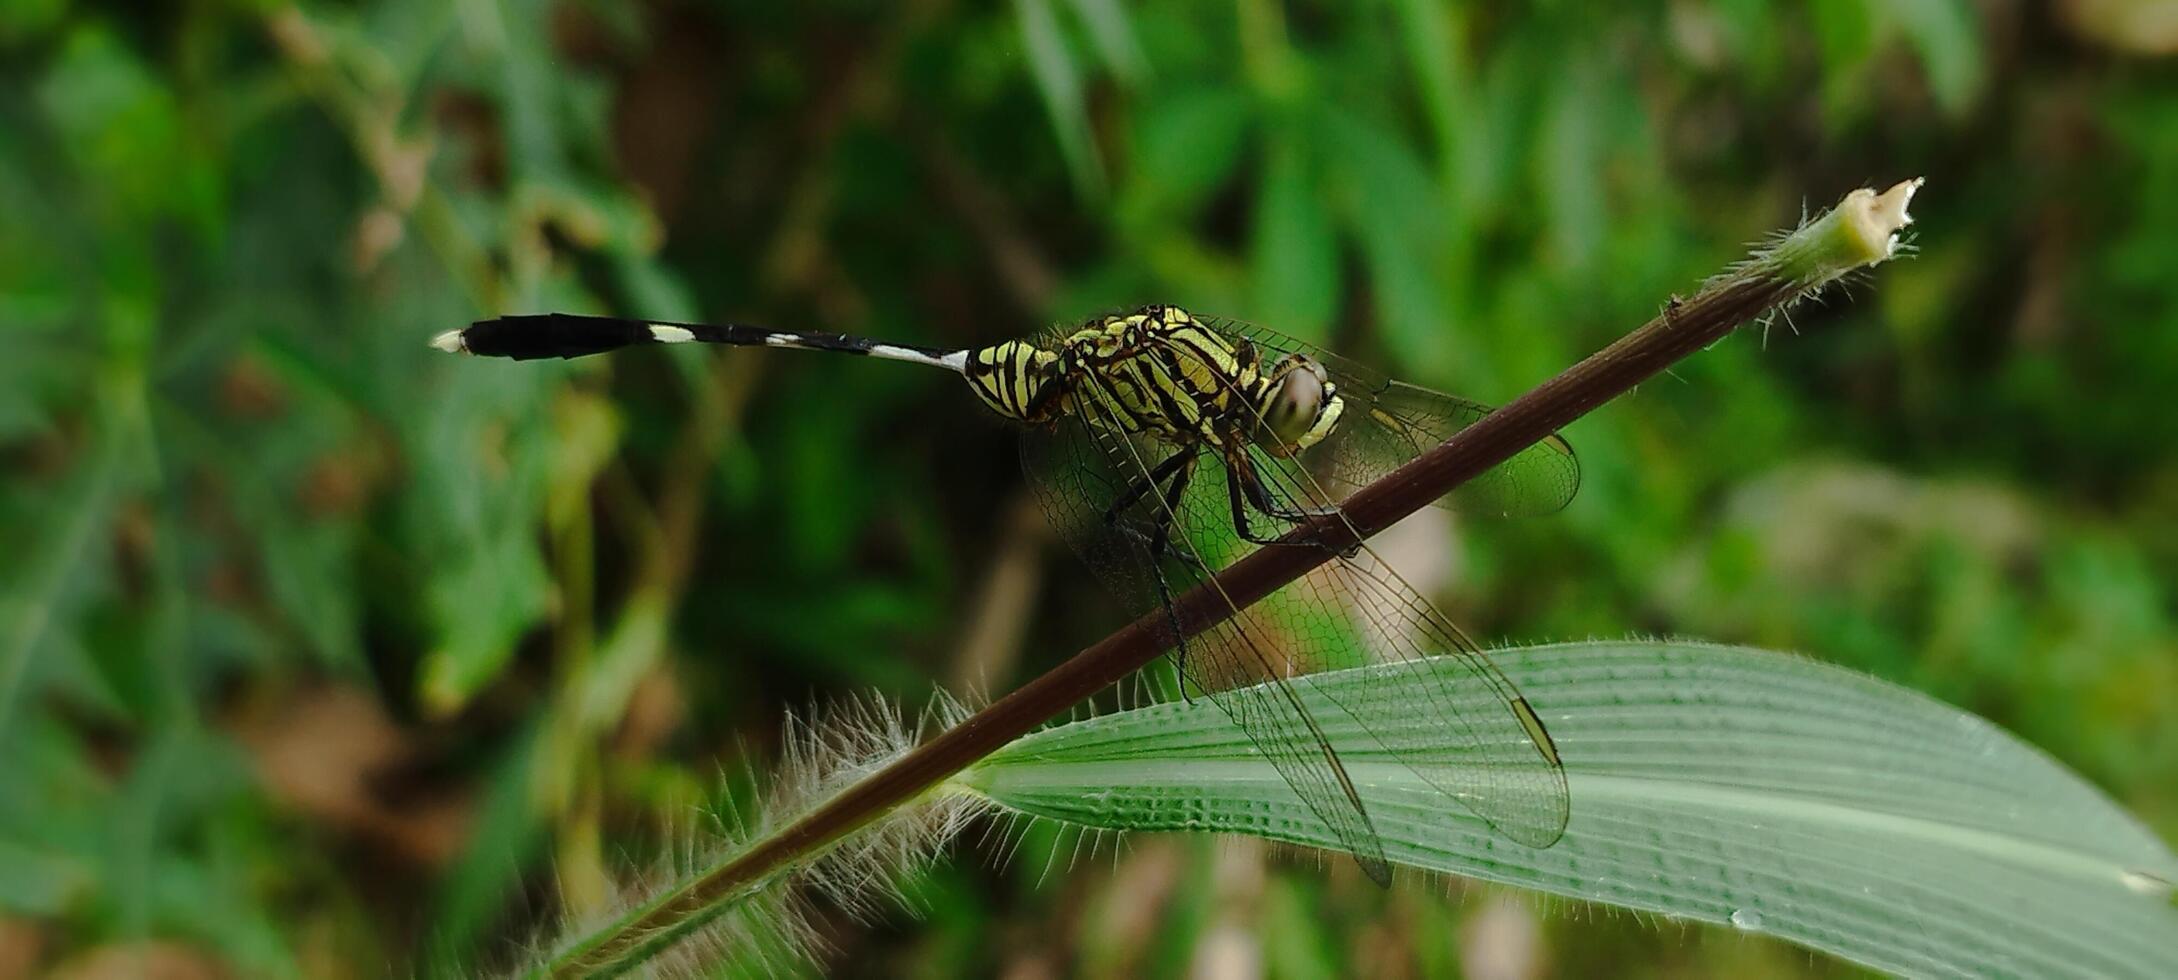 dragonfly perched on a wooden branch photo